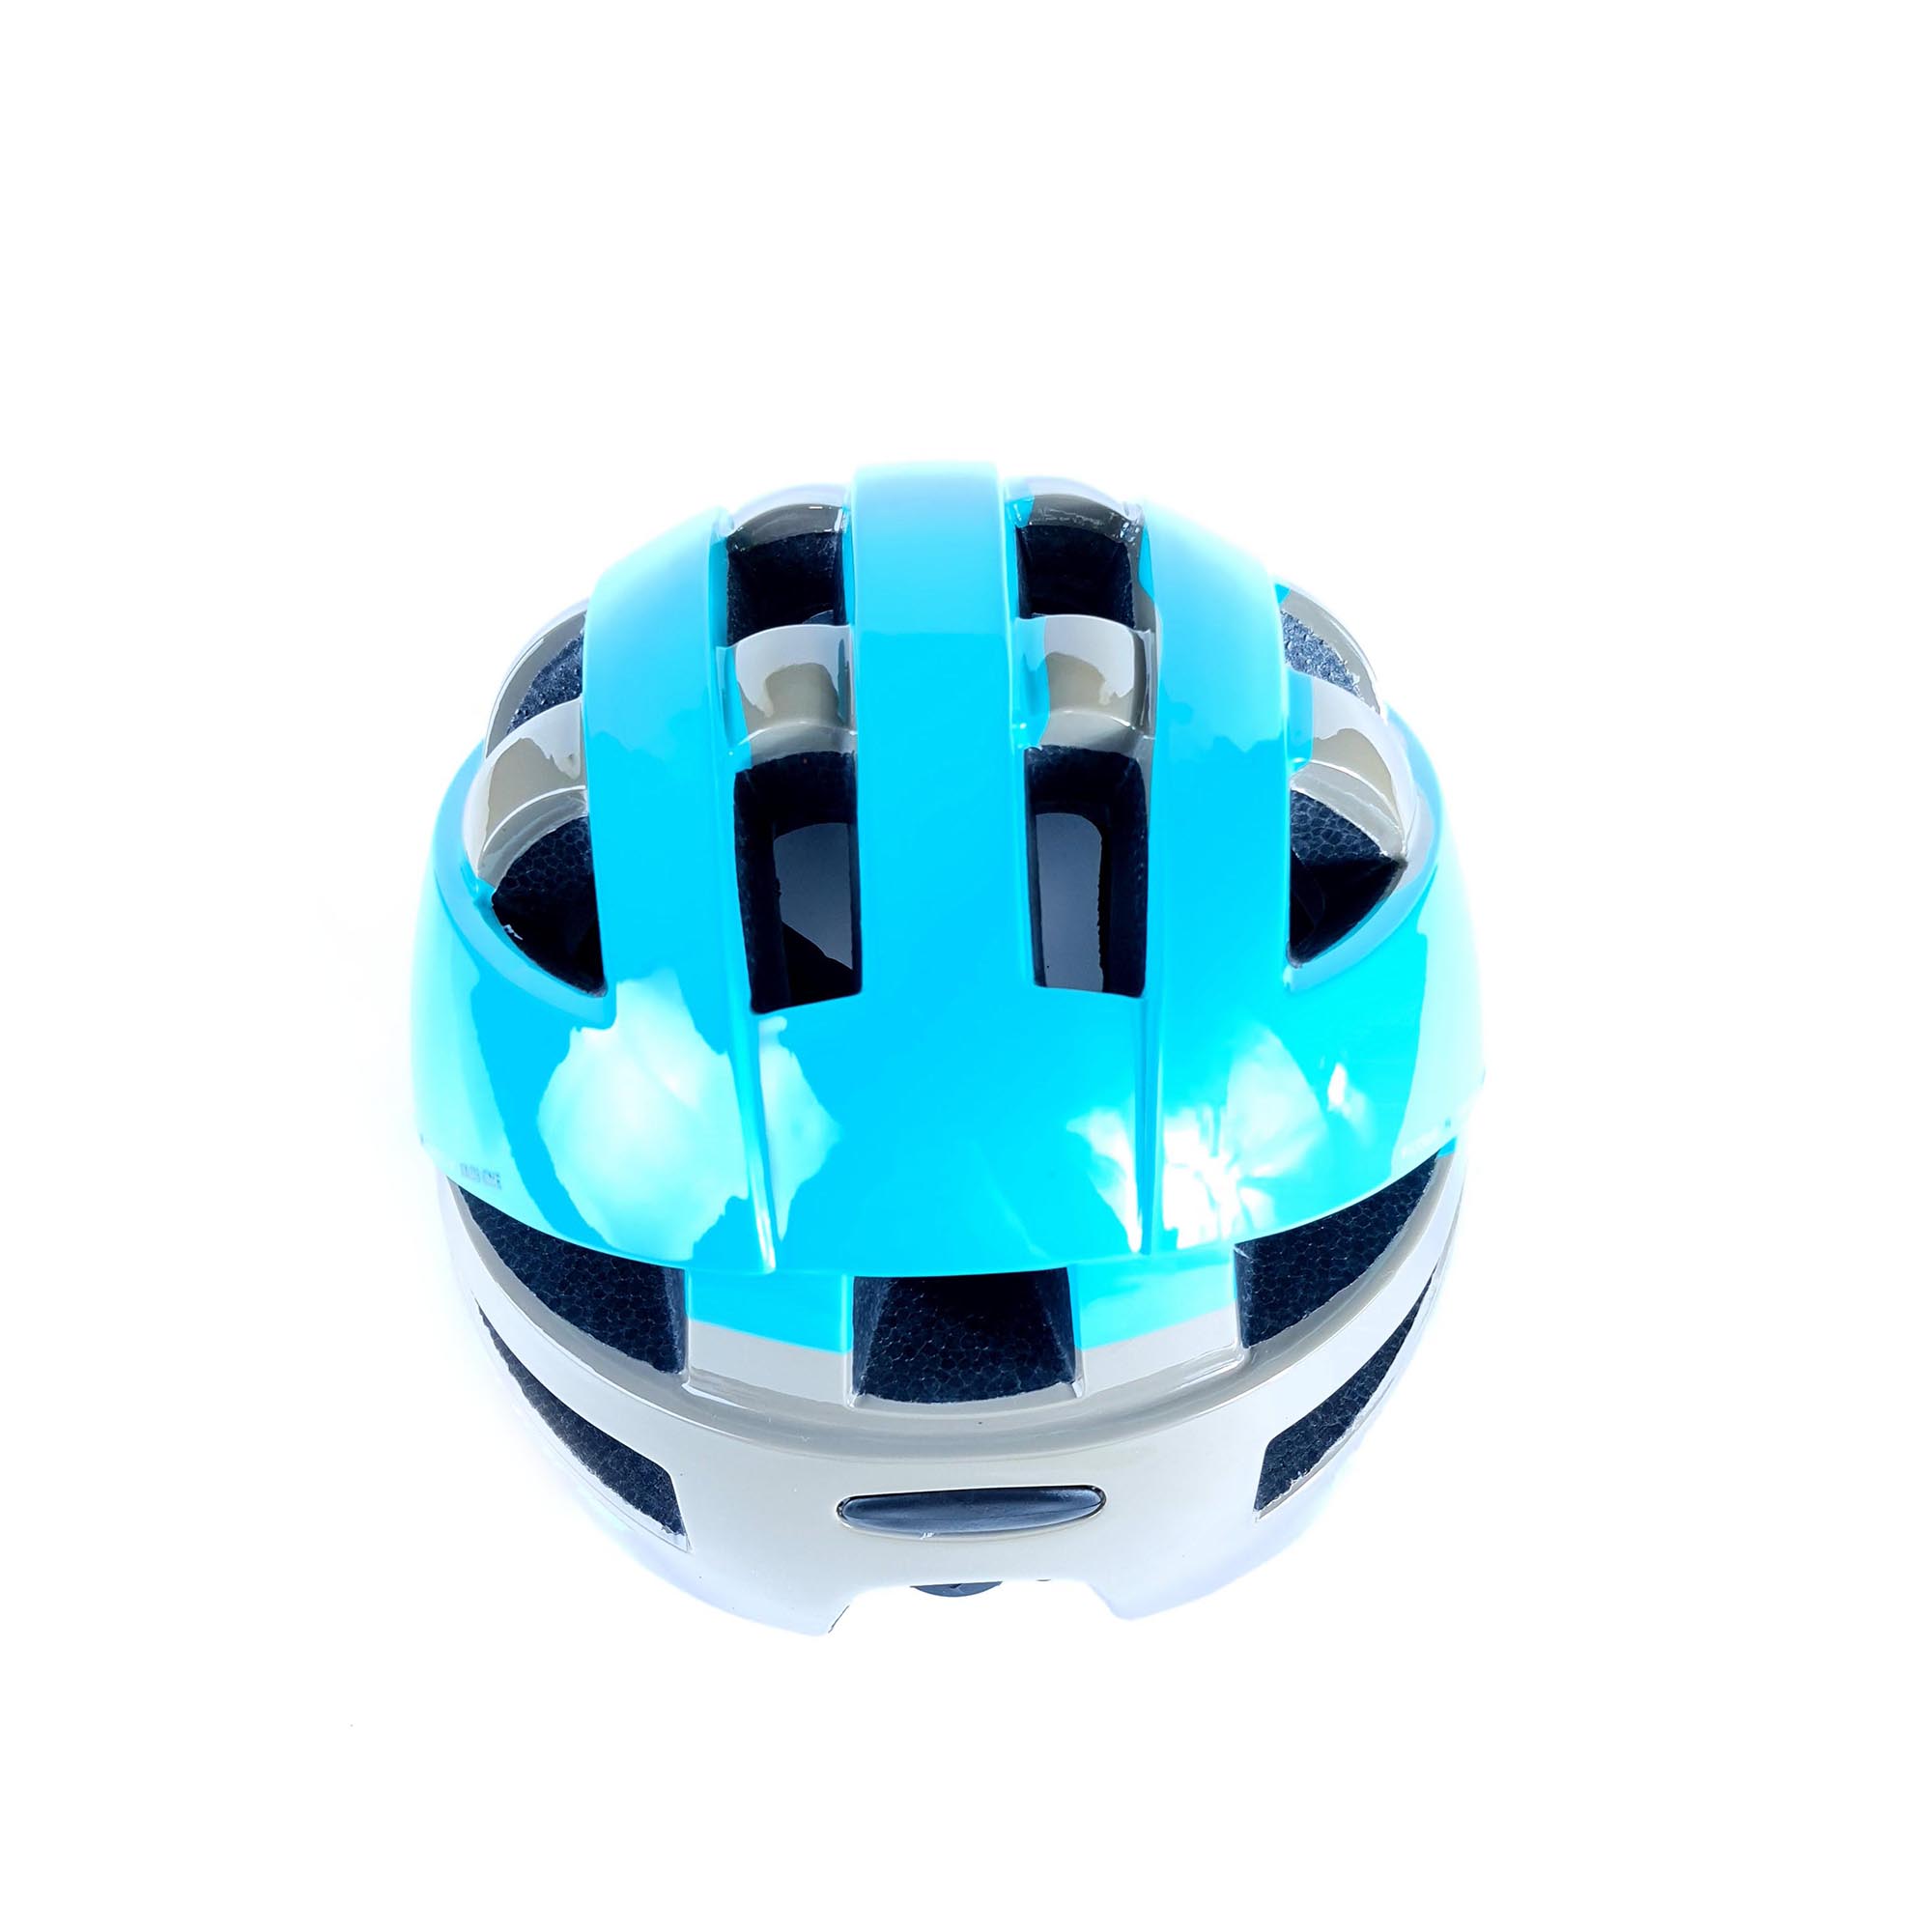 Capacete Ciclismo Infantil High One Baby